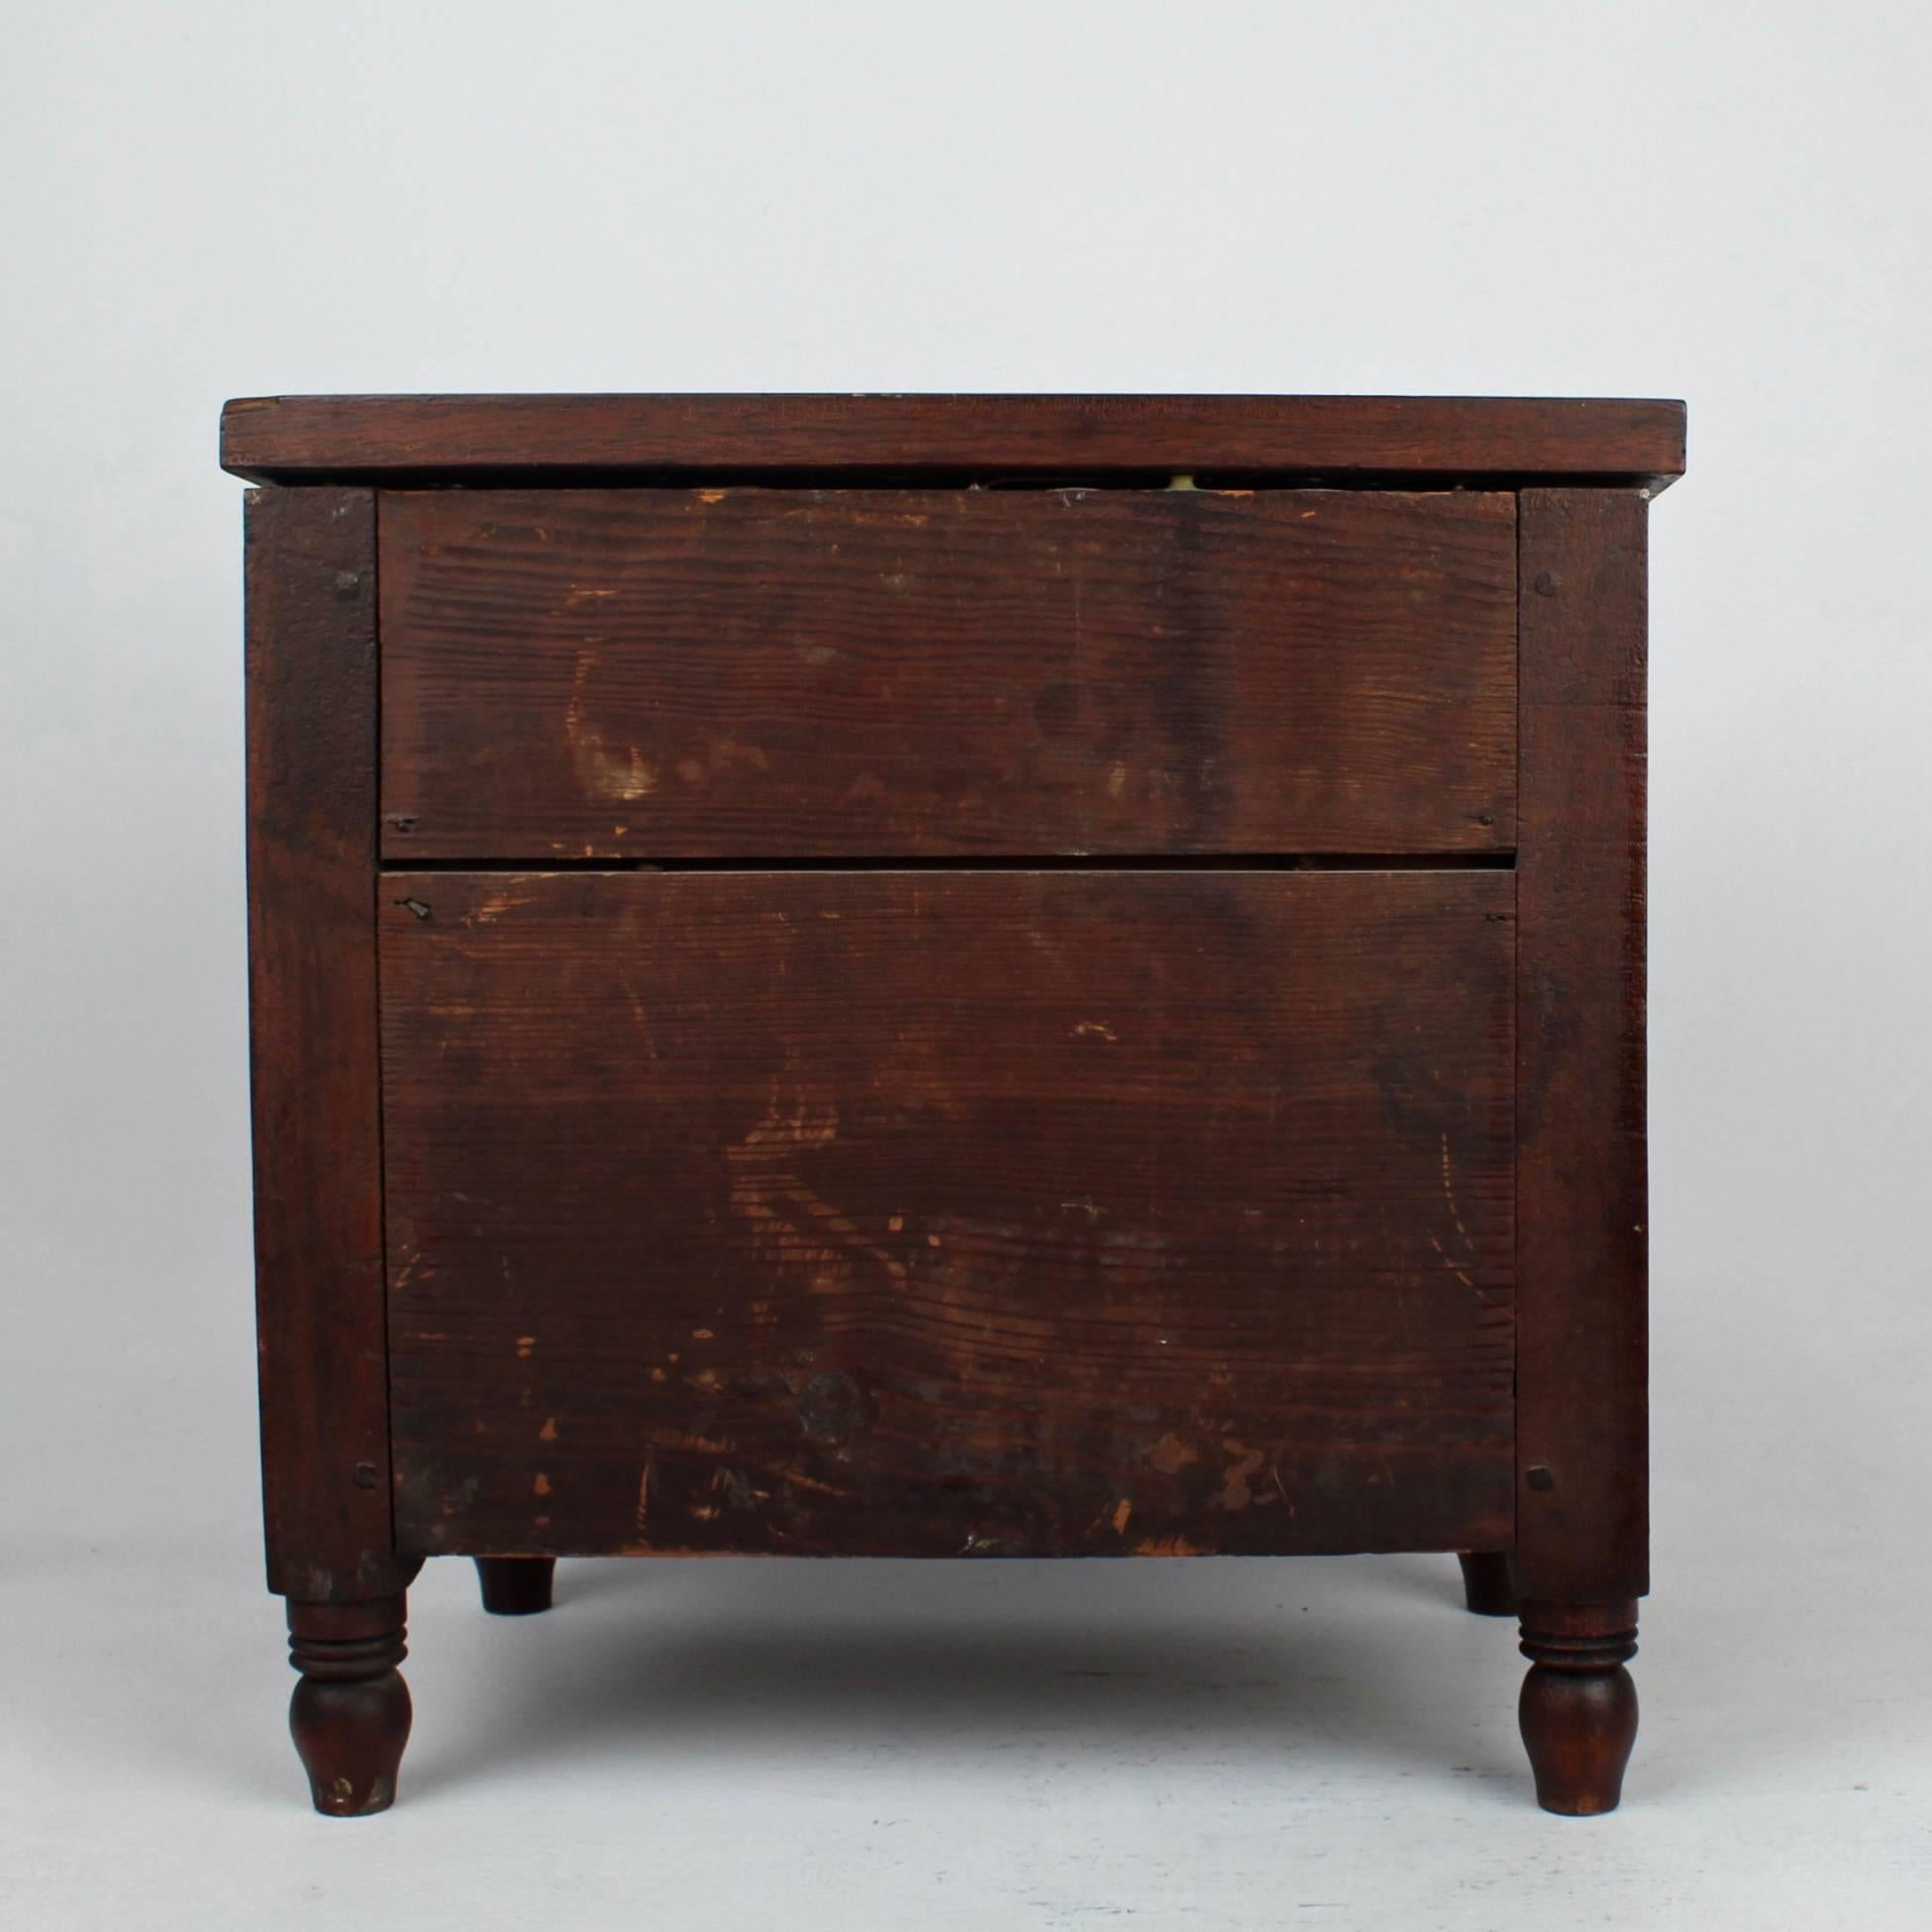 Late 19th Century Pennsylvania Miniature Walnut & Pine Paneled Chest of Drawers For Sale 1